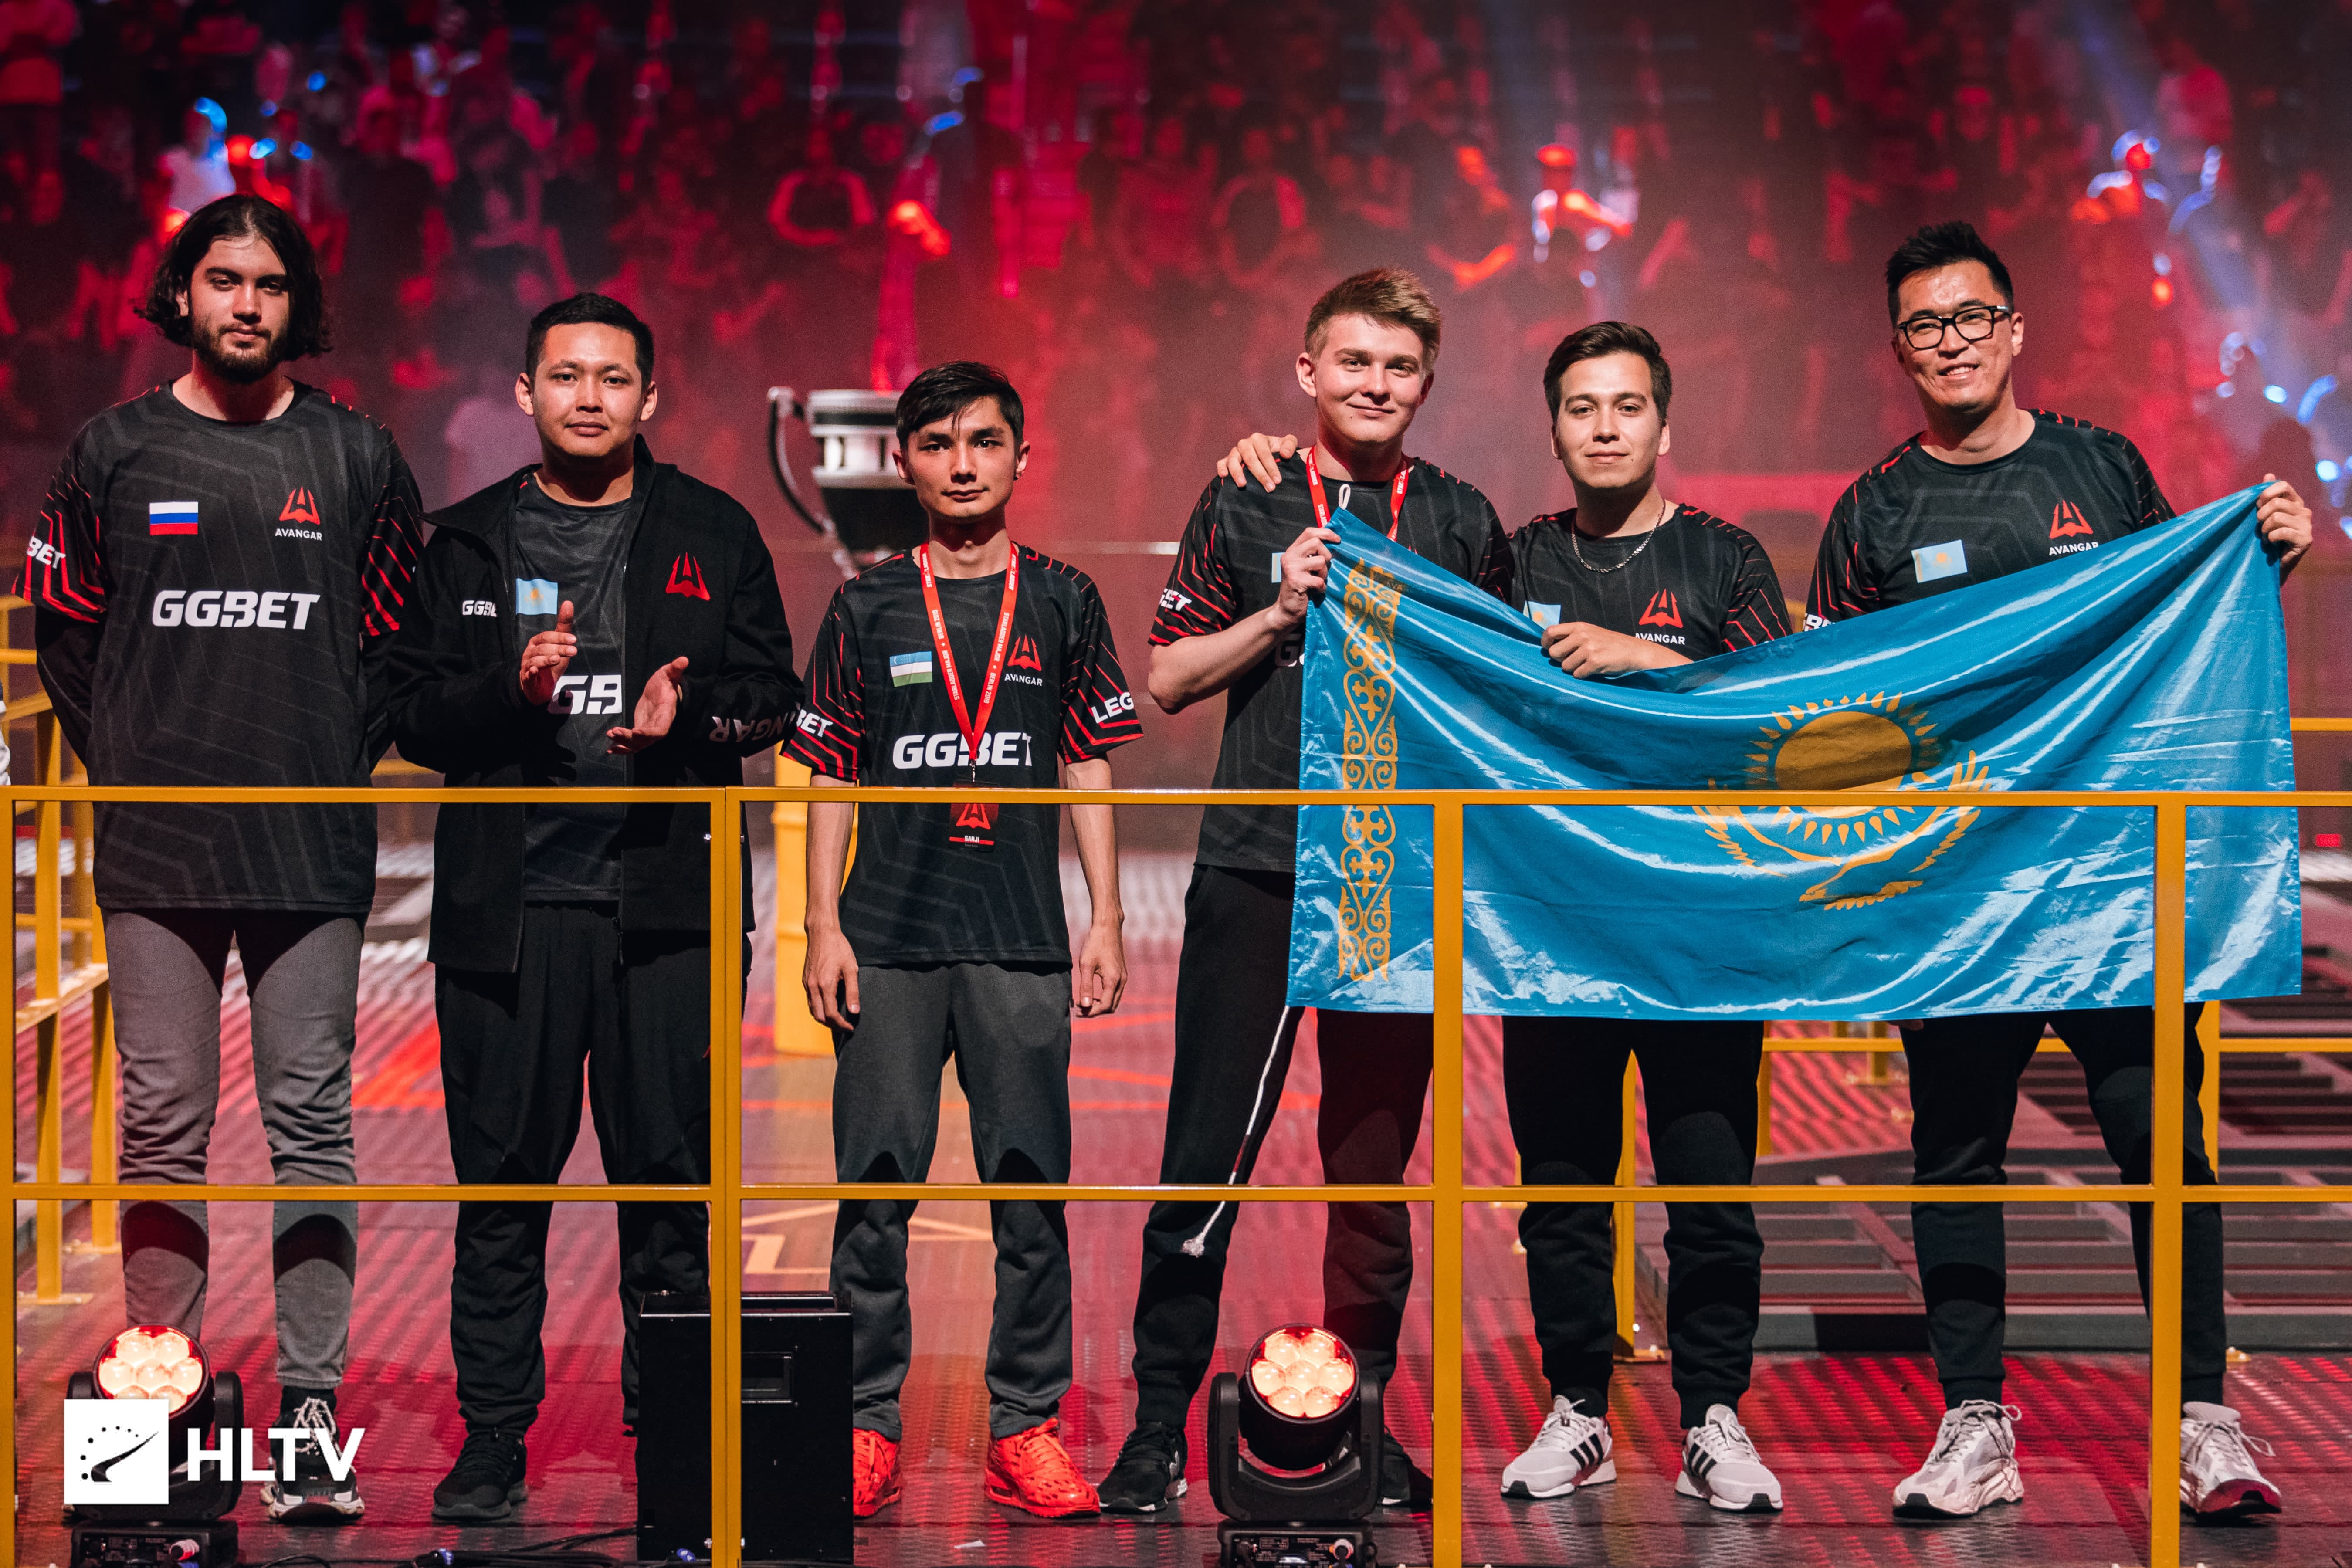 HLTV.org's Top 10 highlights of 2019 